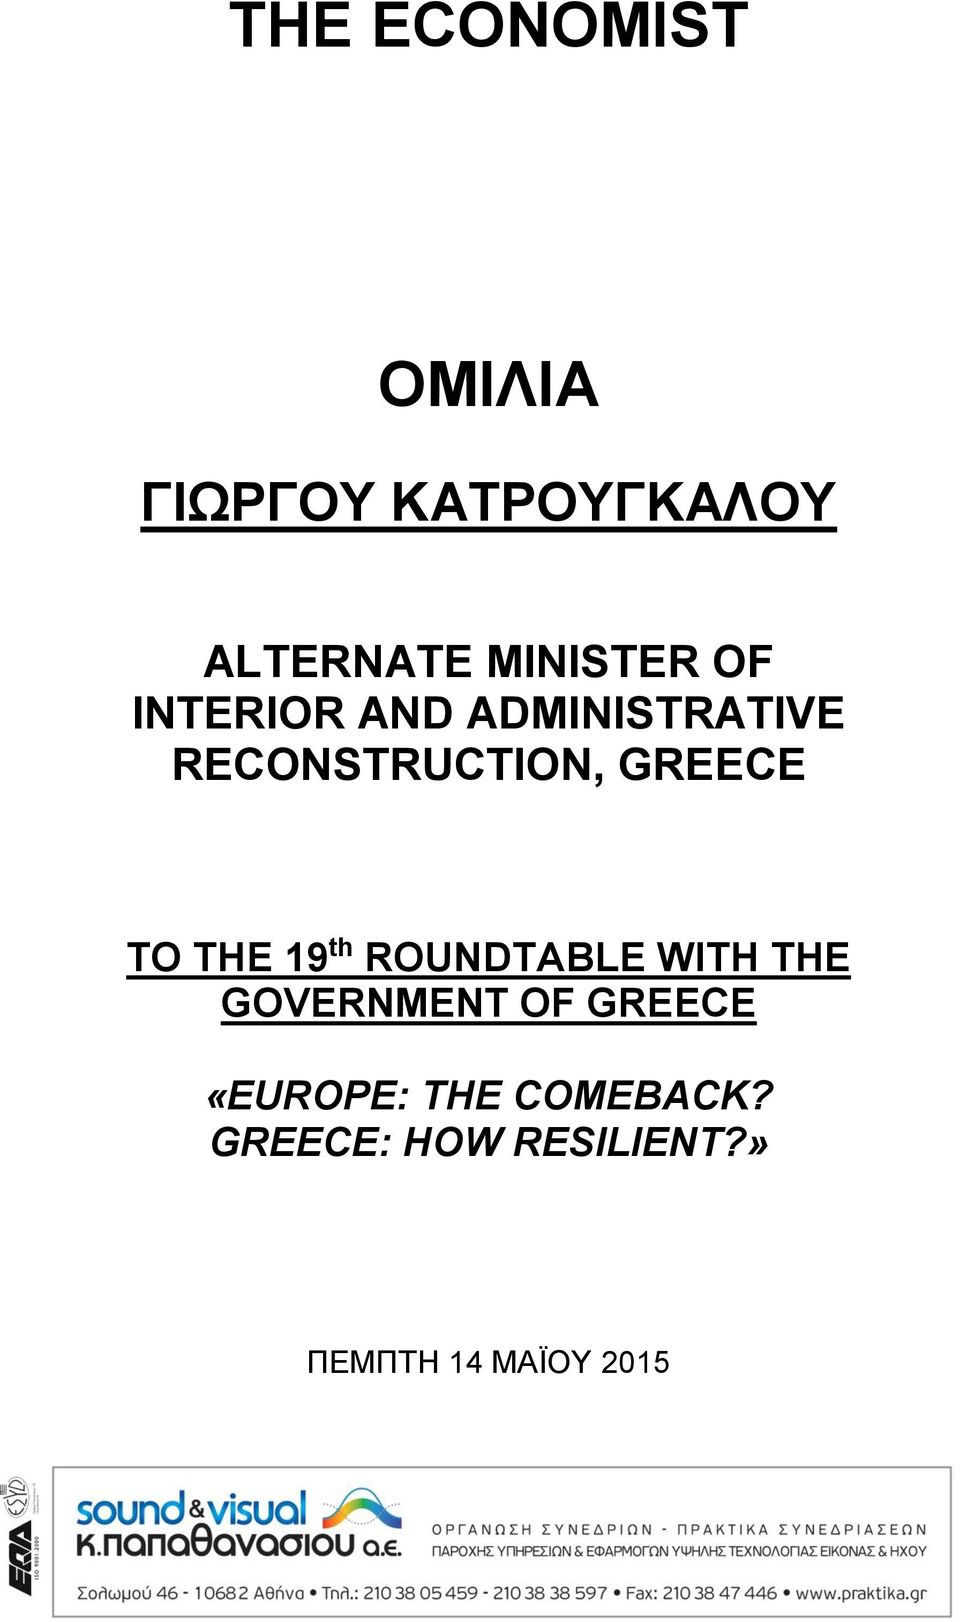 GREECE TO THE 19 th ROUNDTABLE WITH THE GOVERNMENT OF